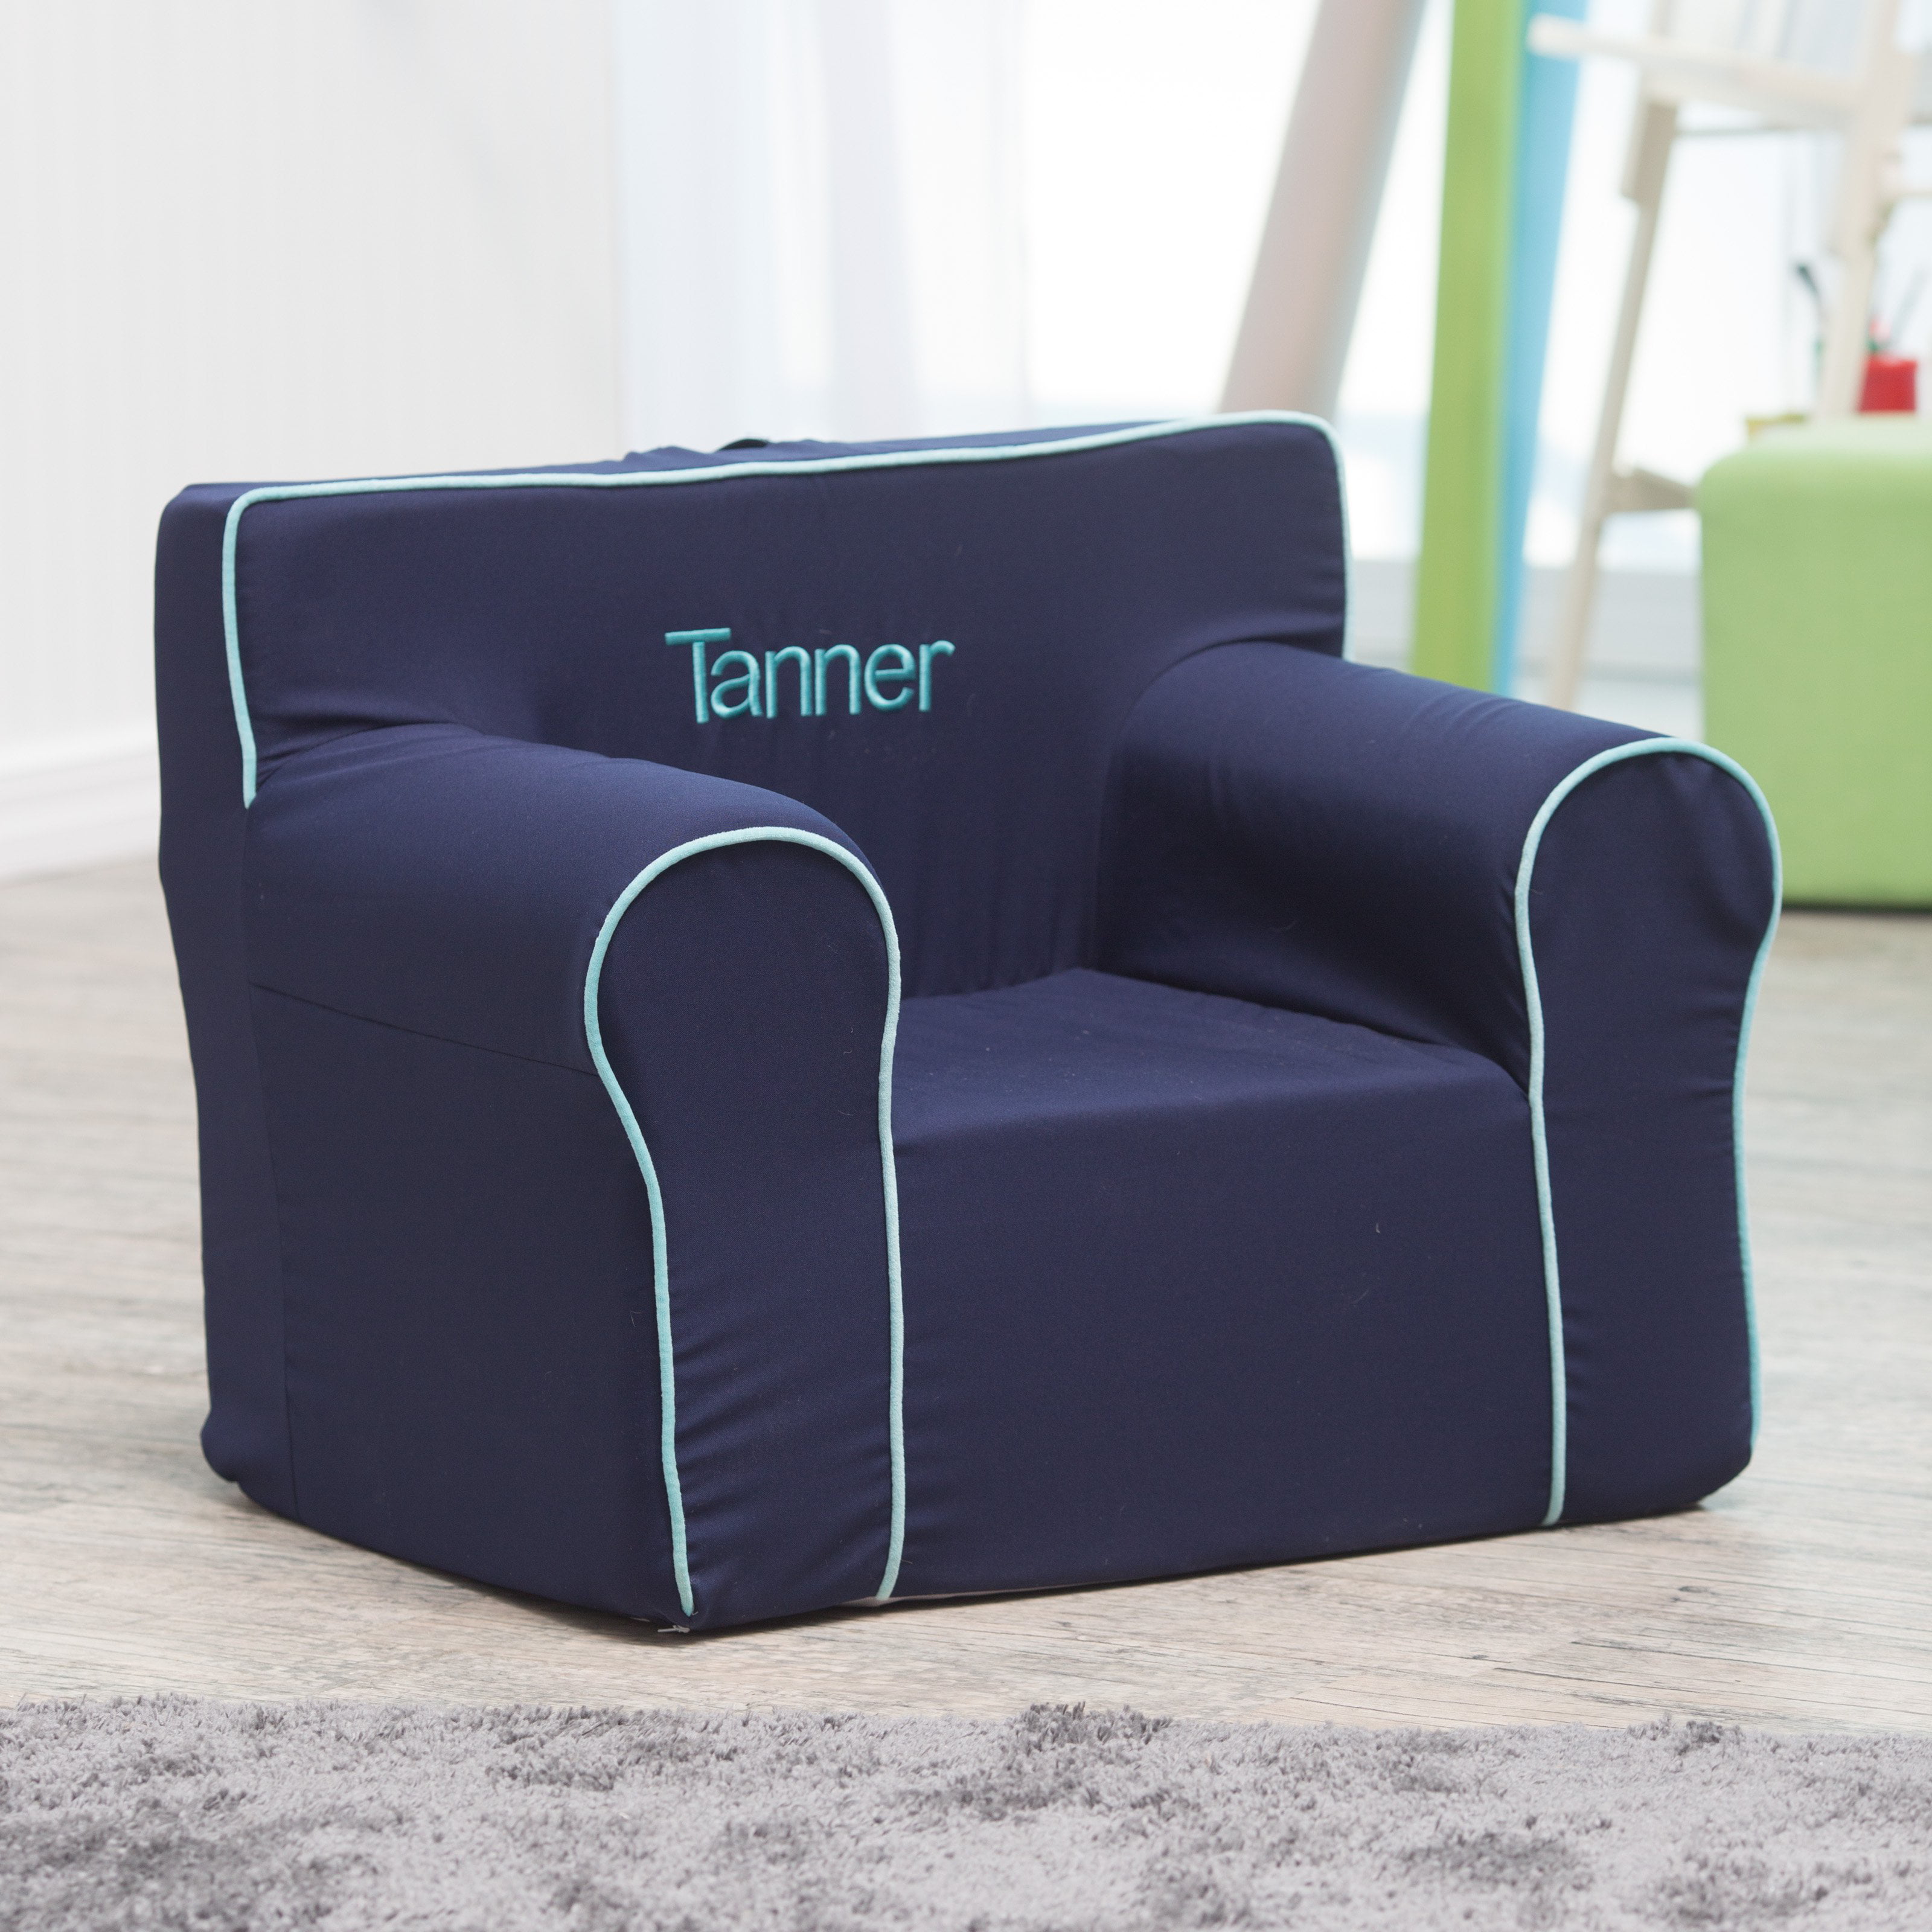 personalized kids recliner